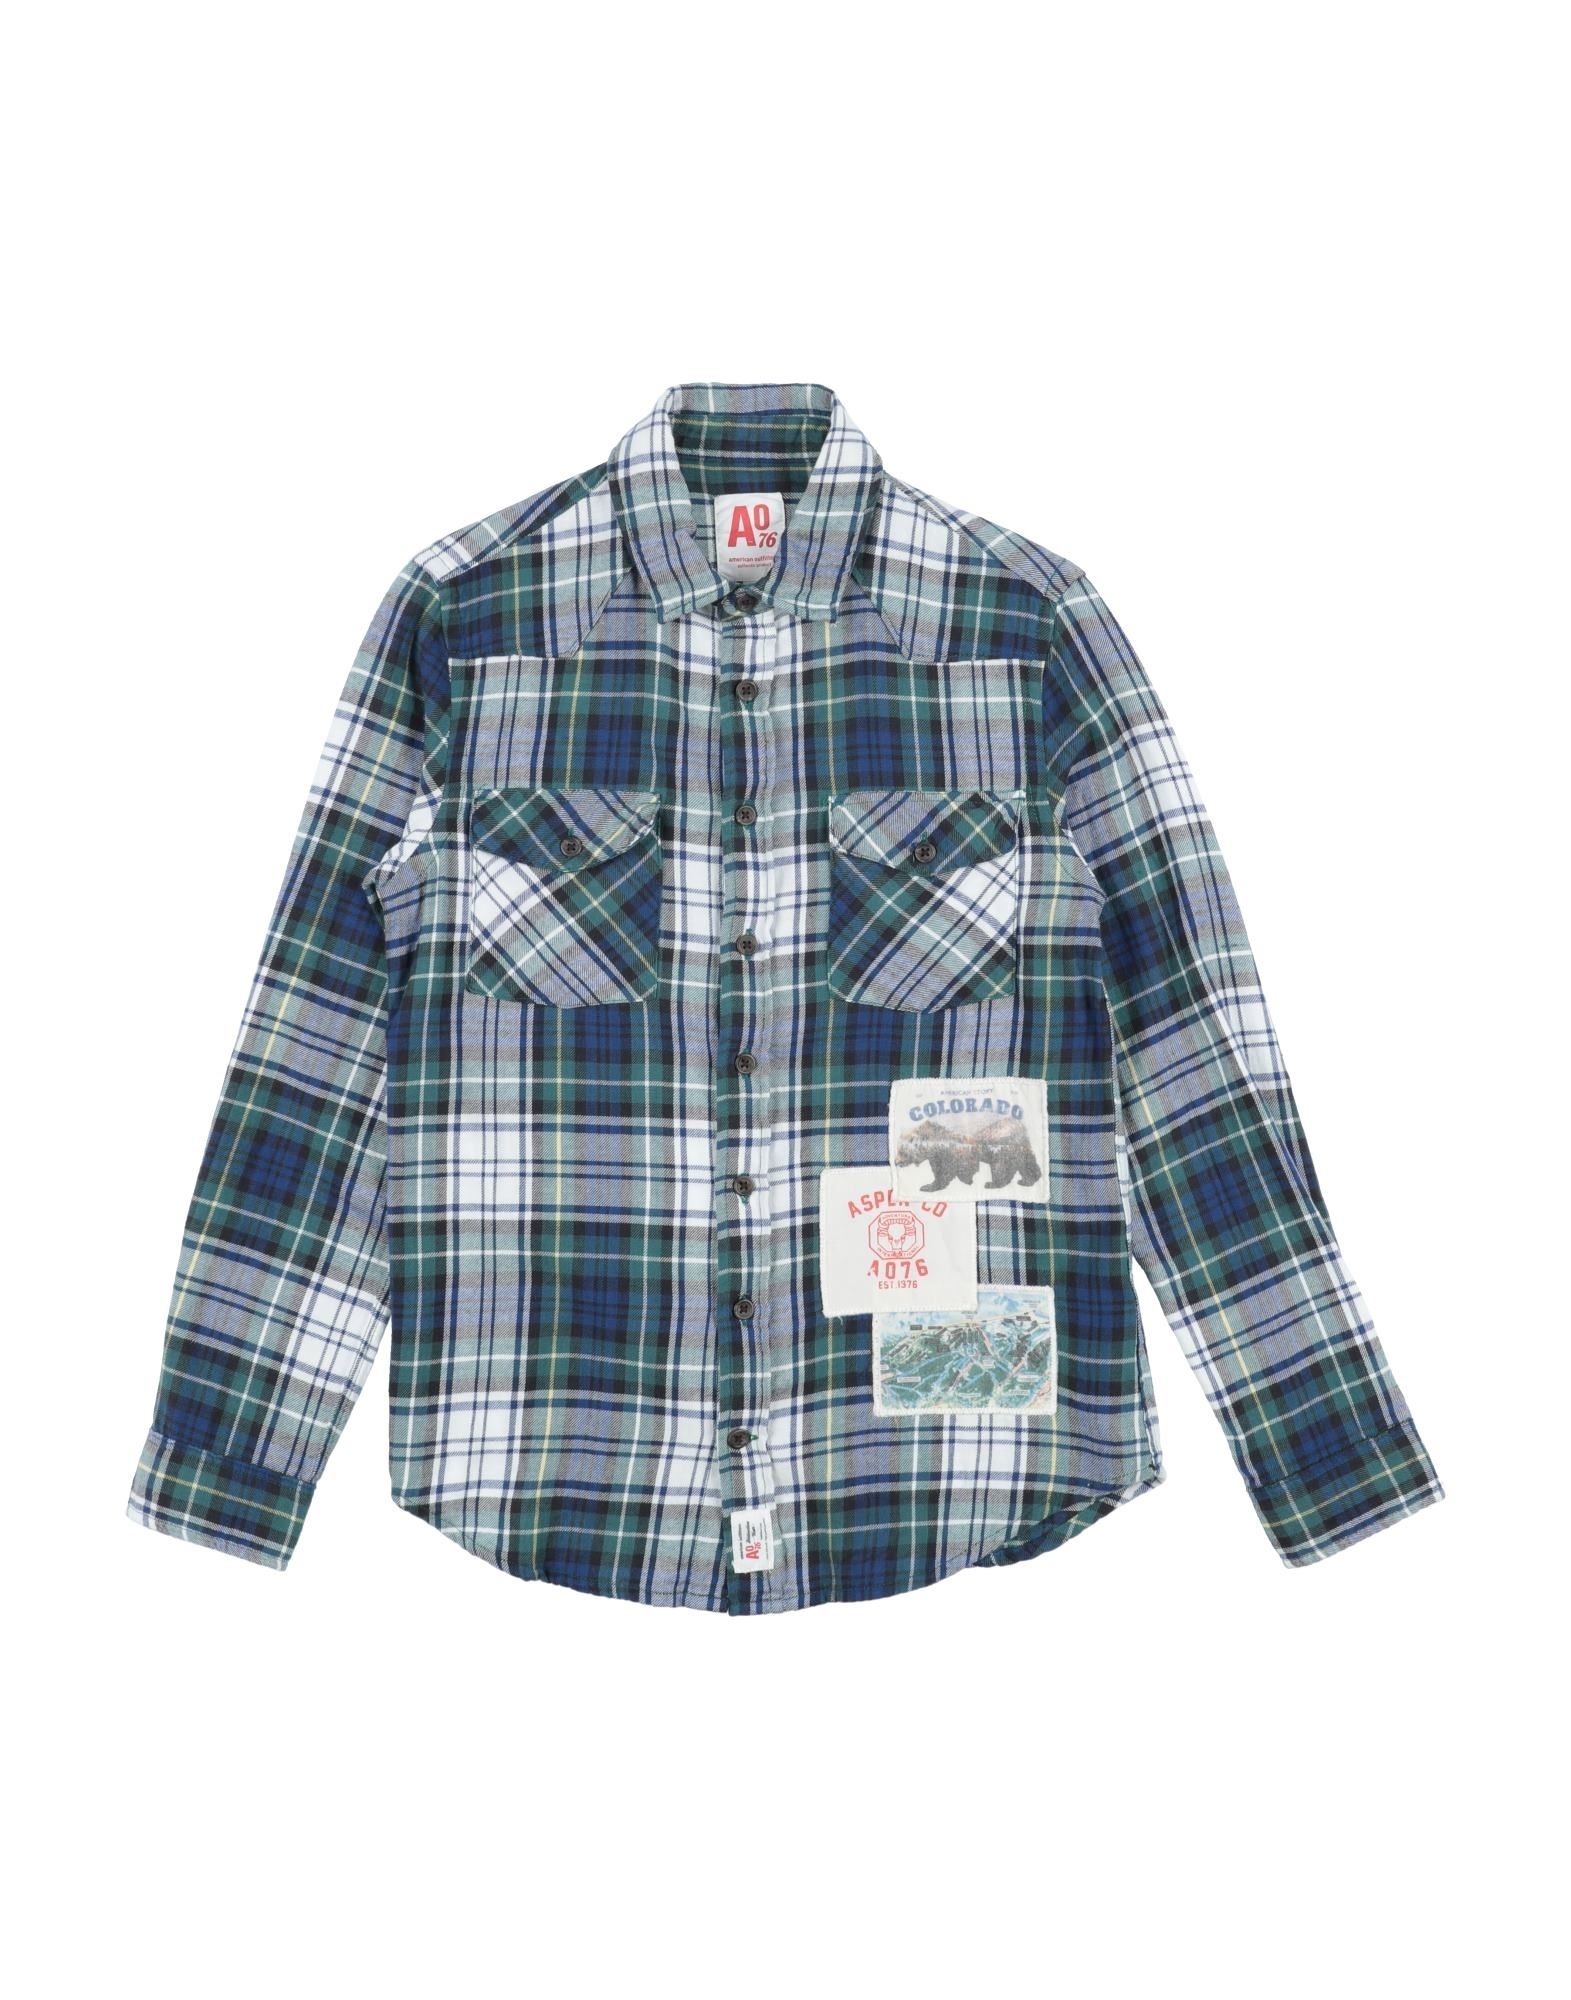 American Outfitters Kids' Shirts In Dark Green